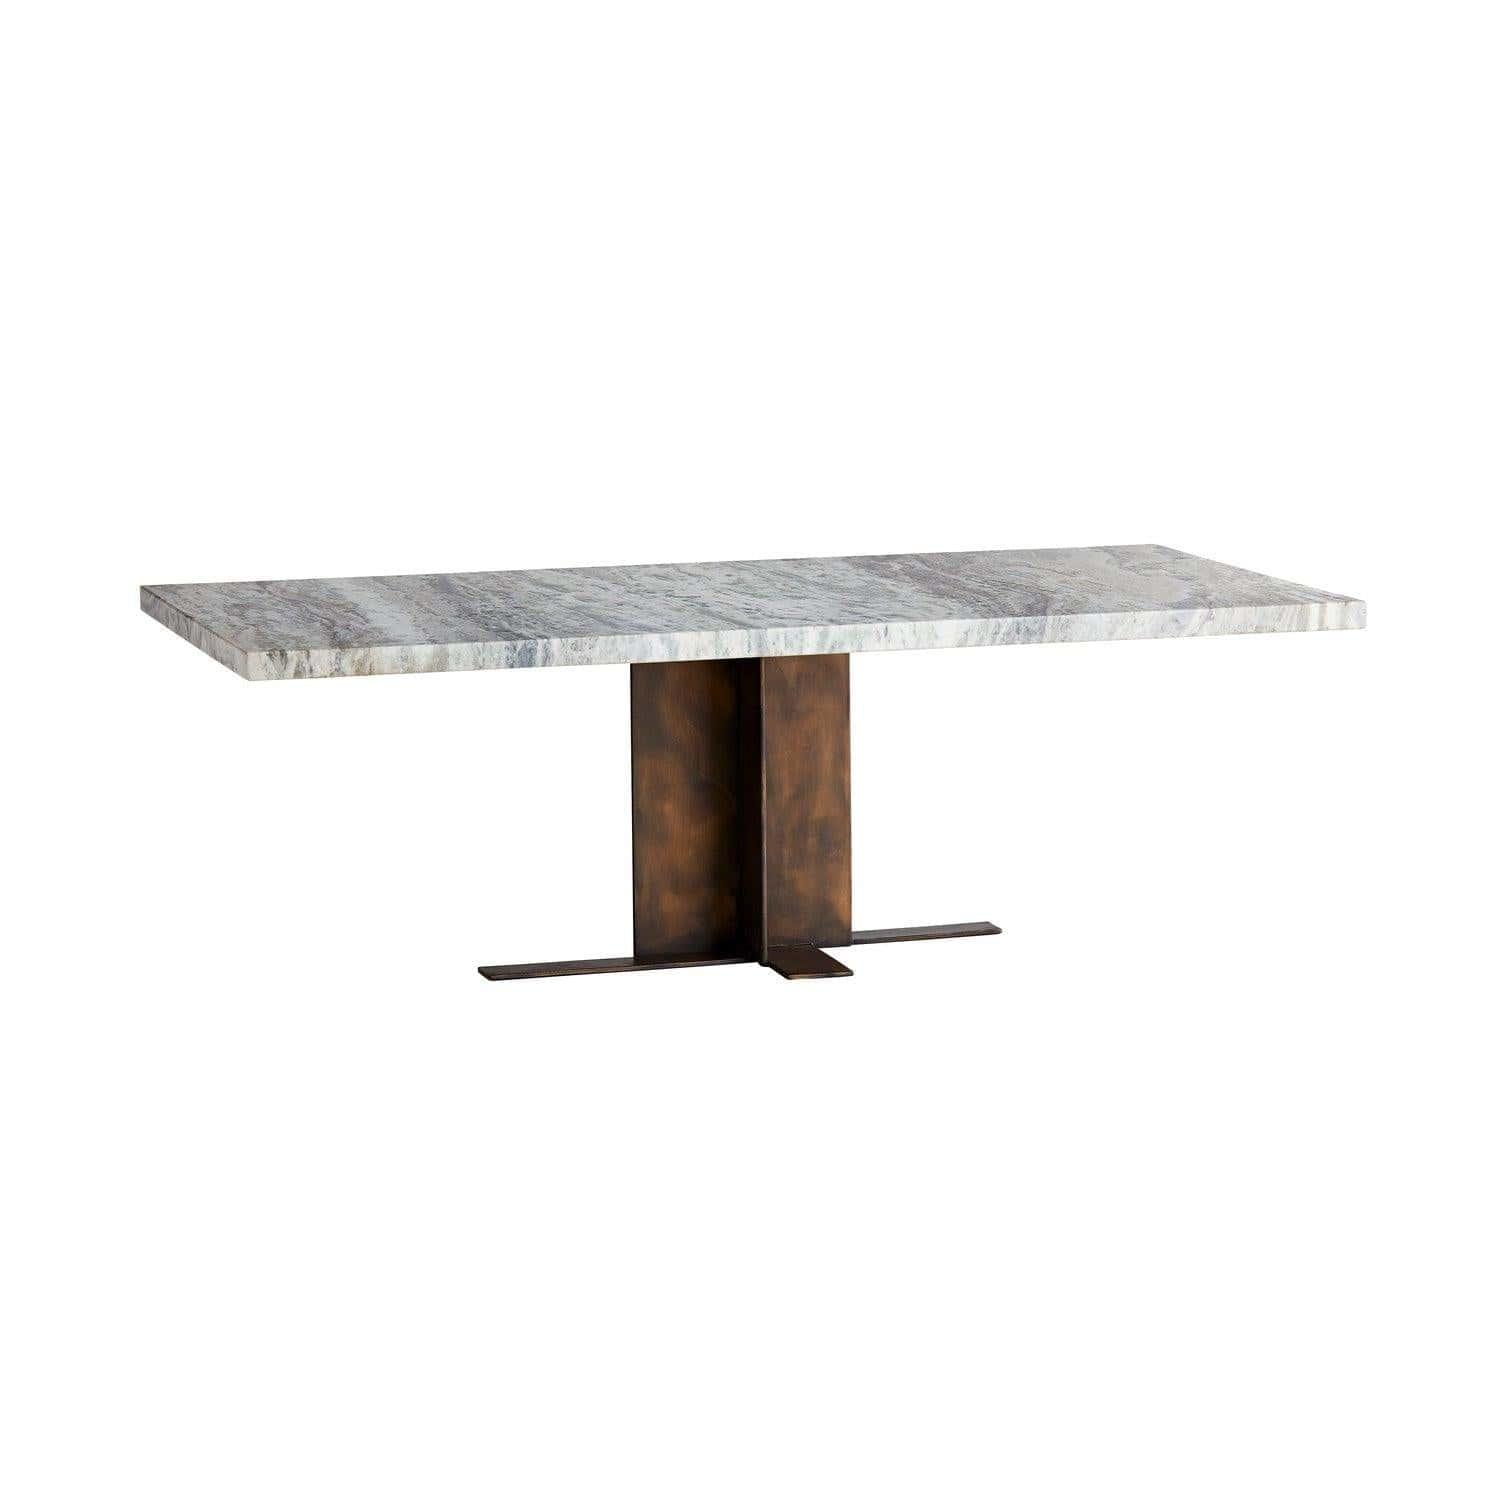 Arteriors - Hermione Cocktail Table - 4899 | Montreal Lighting & Hardware